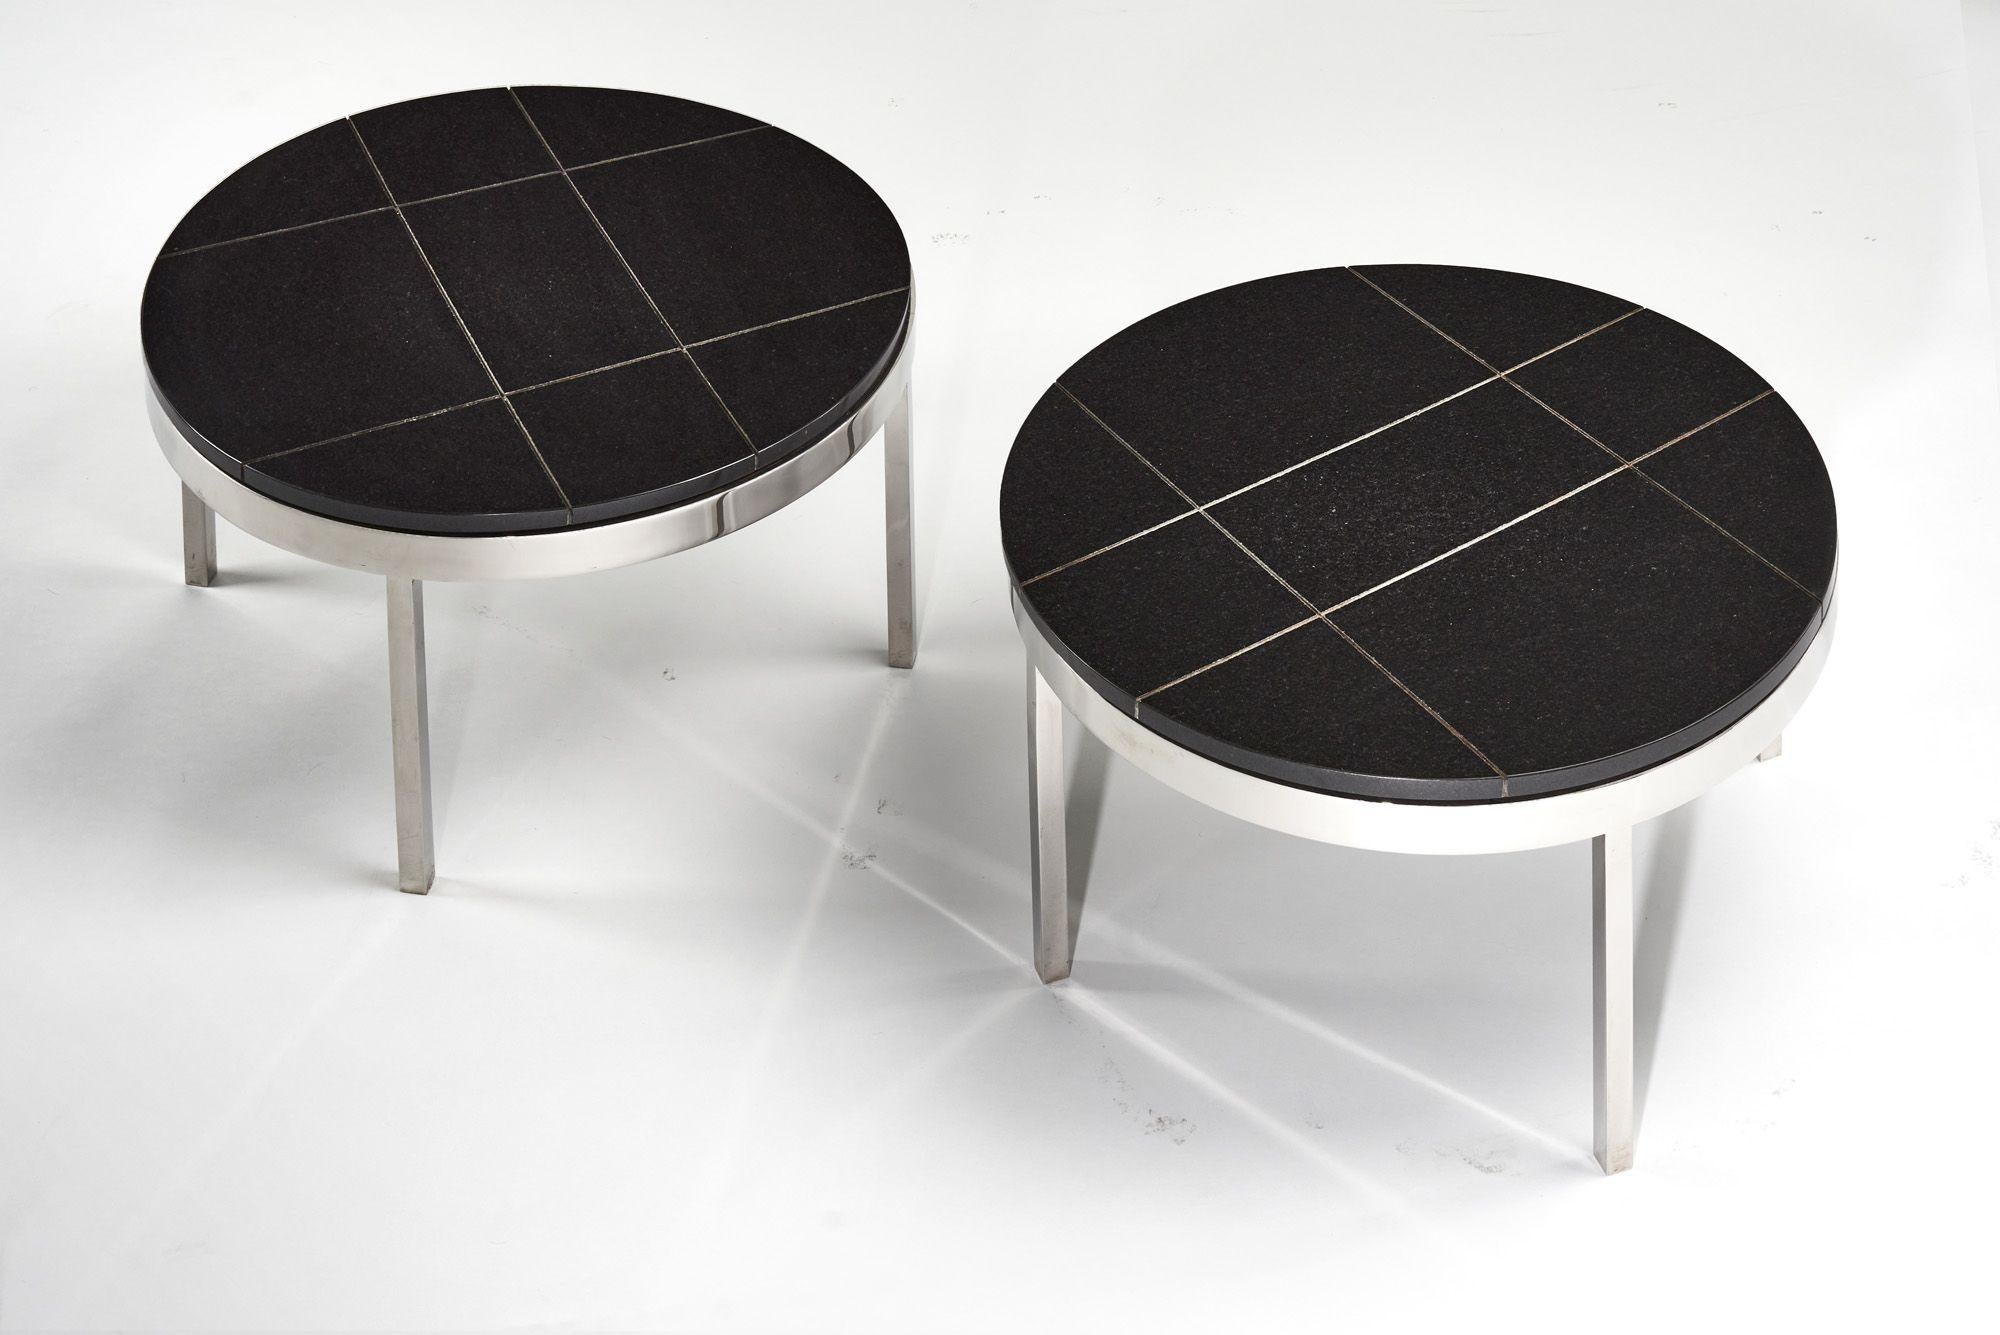 Knoll black granite and stainless steel side/end tables, 1980. Custom made for a Corporate Headquarters, top is incised with graphic grid pattern.